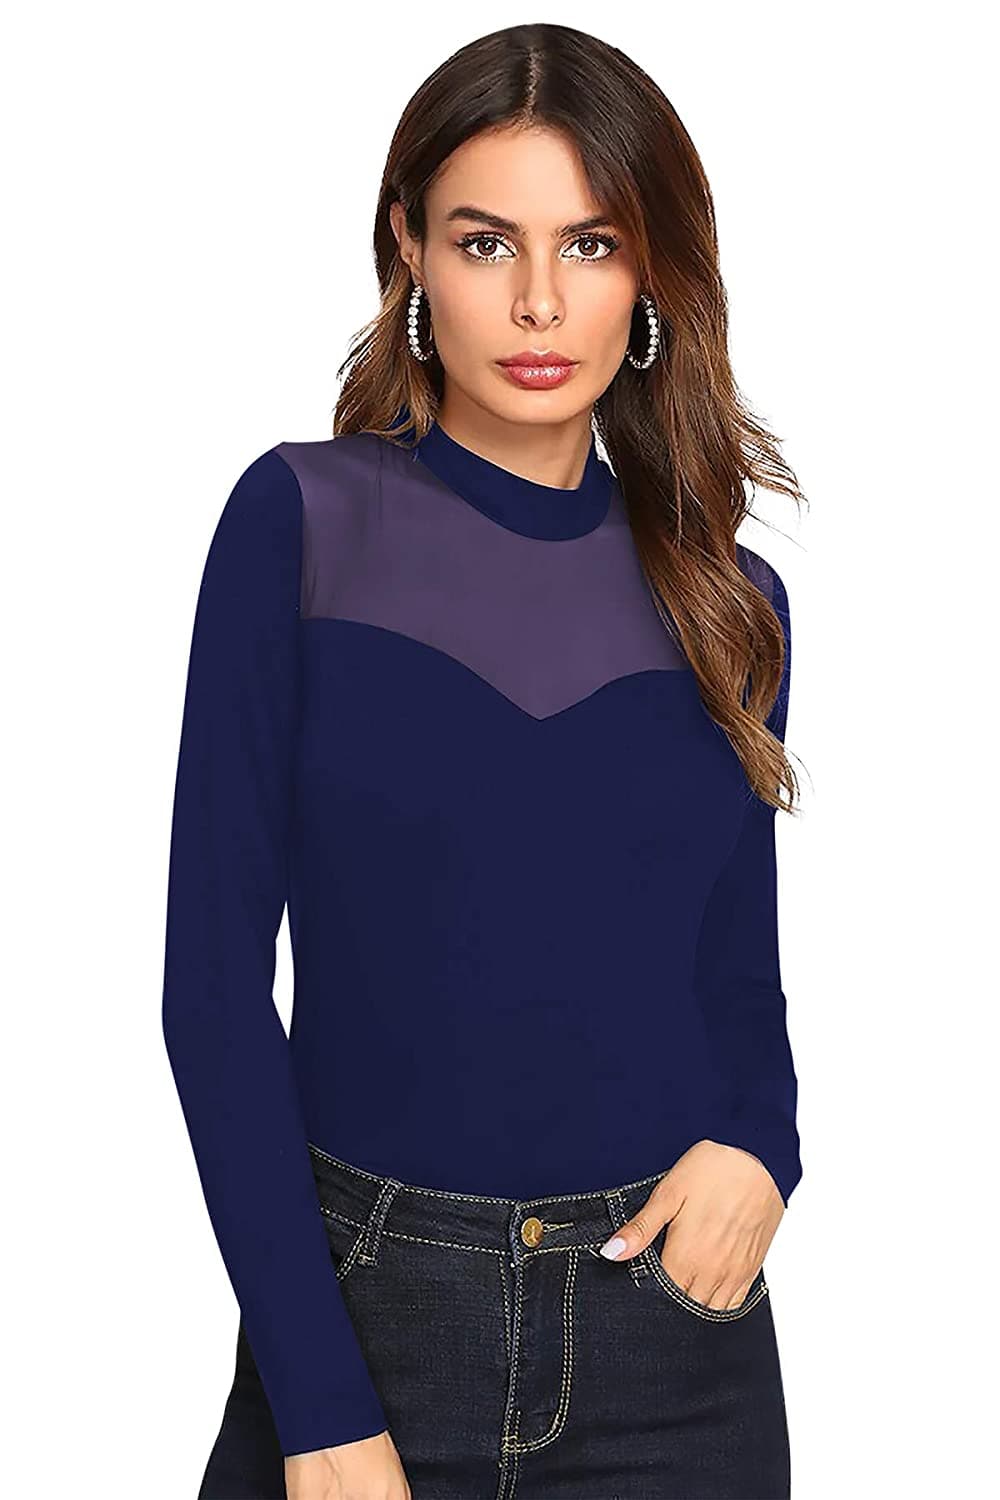 Red Round Neck Full Sleeve Top